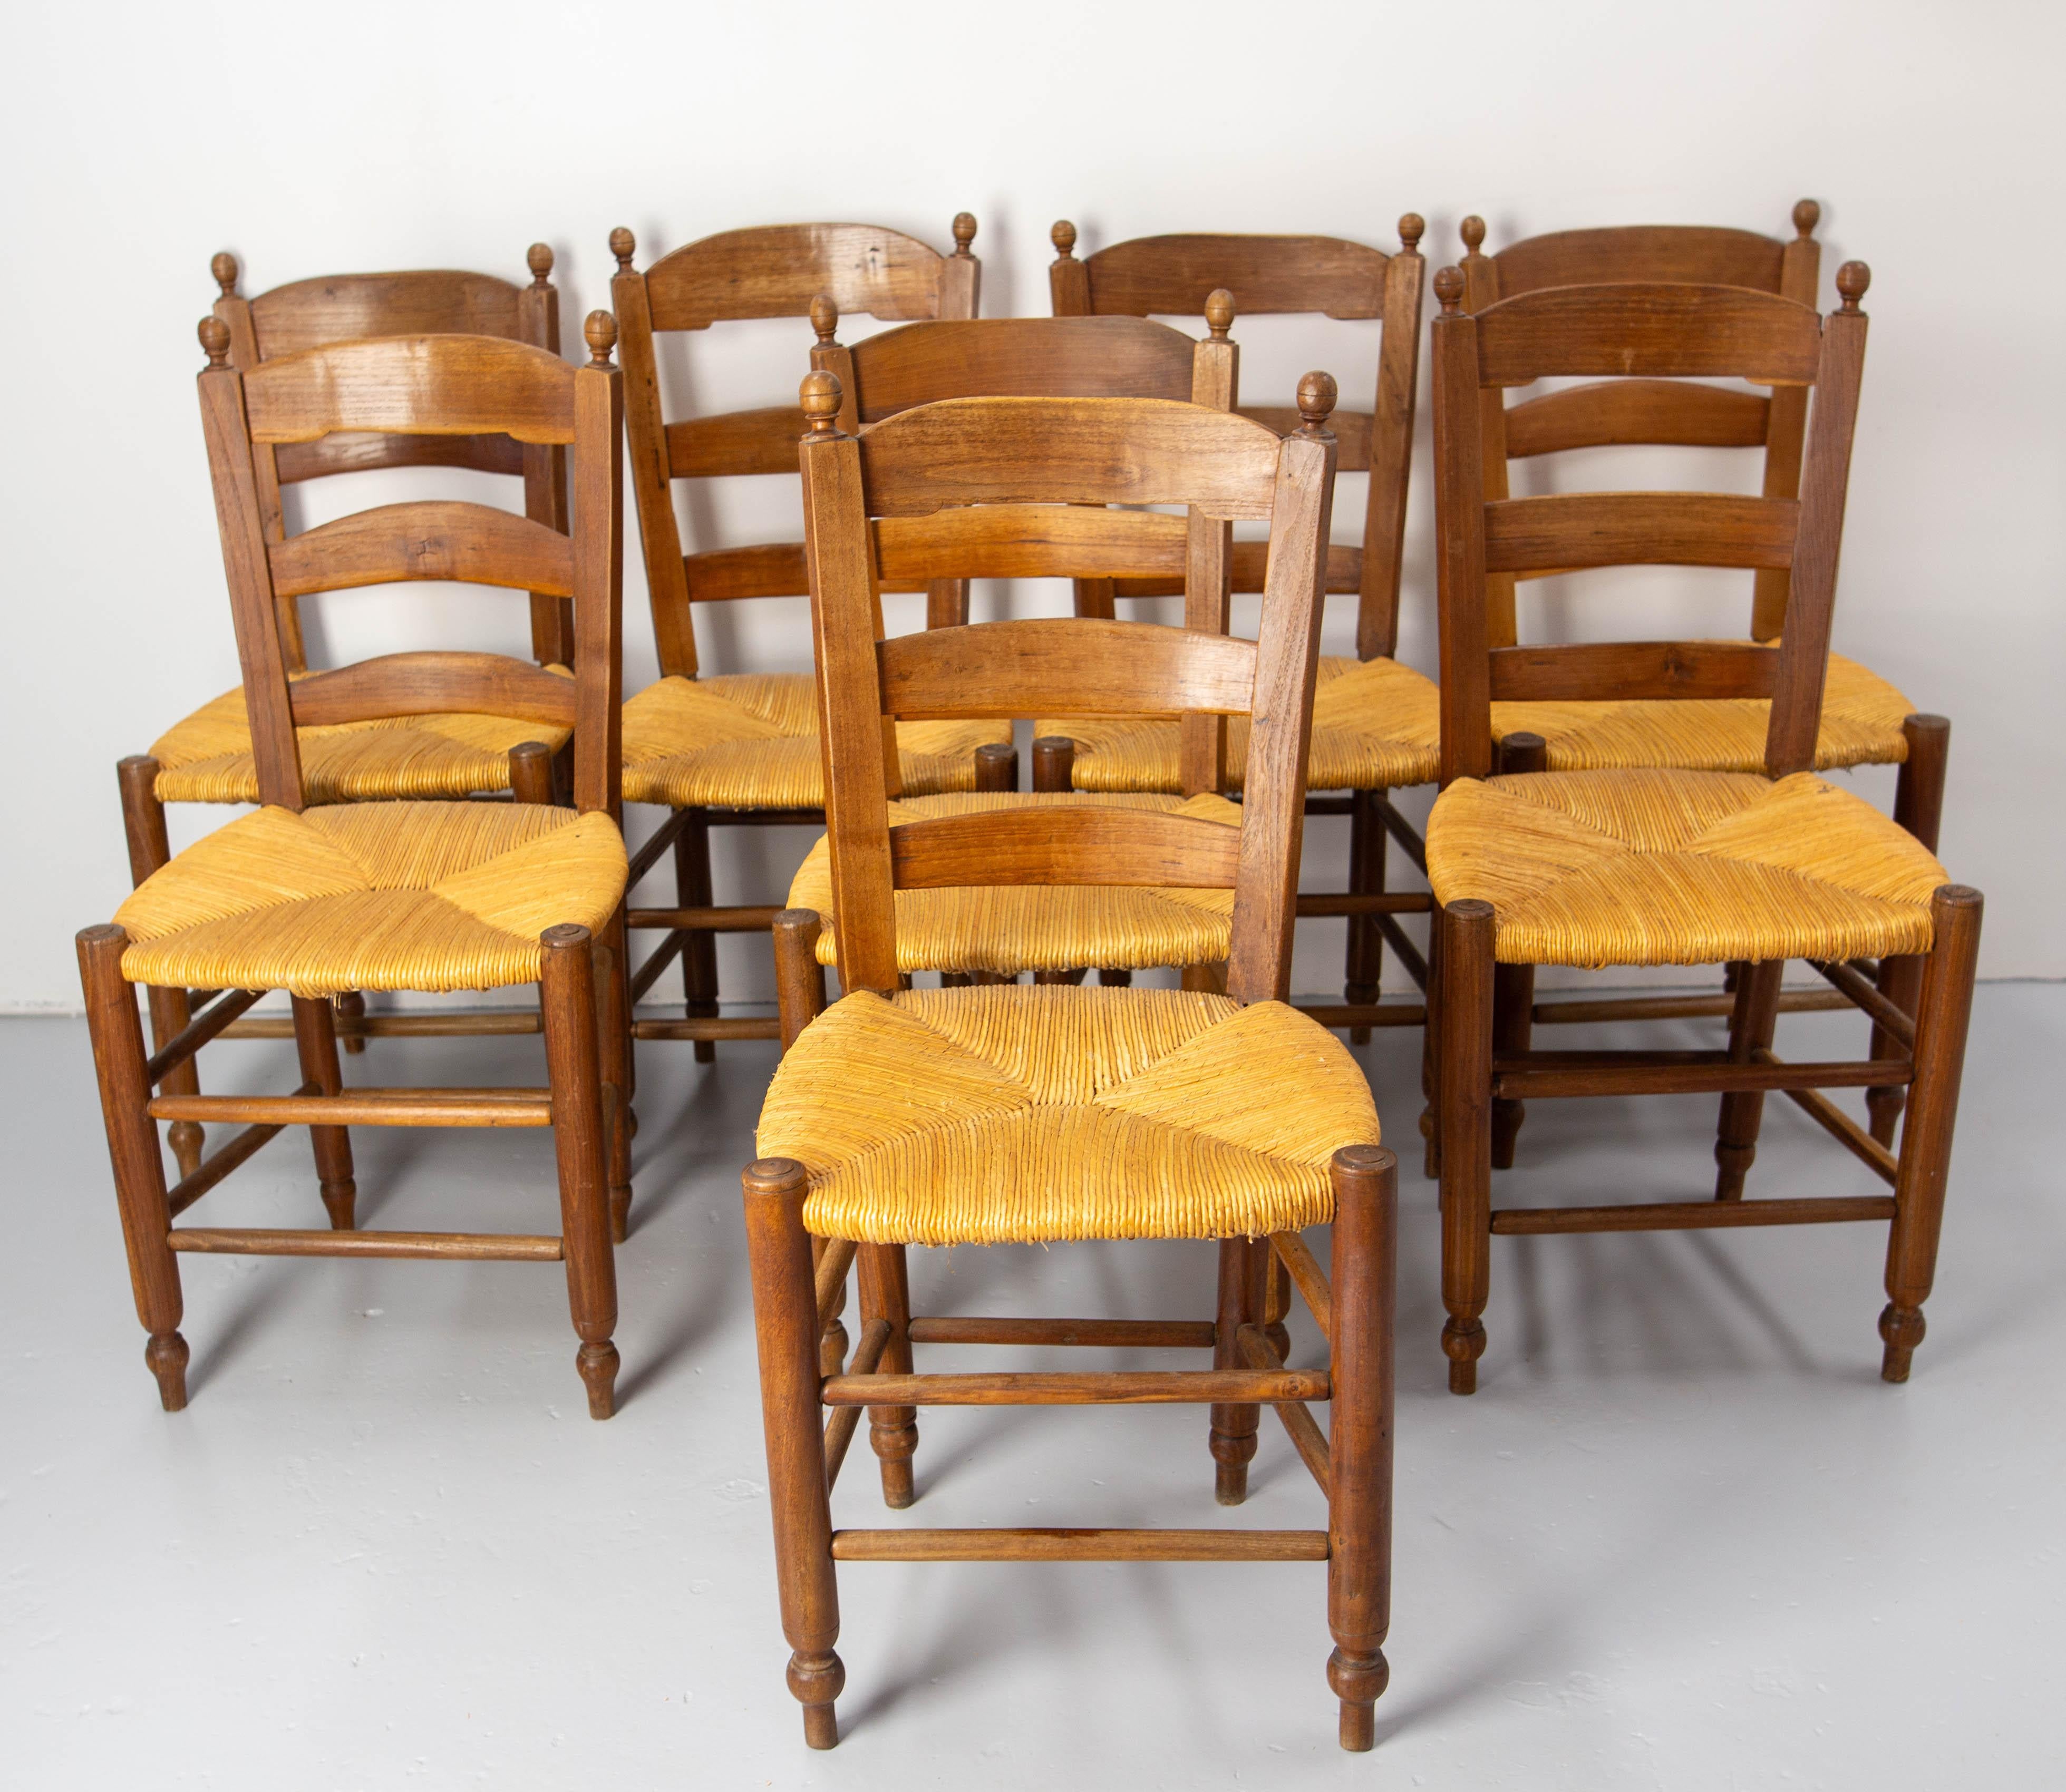 French strawed and turned sets of chairs, made in elm circa 1880.
These chairs are hand made in a workshop by different workers. It is why the chairs have sometimes have small measurement differences of one to two centimeters, nothing